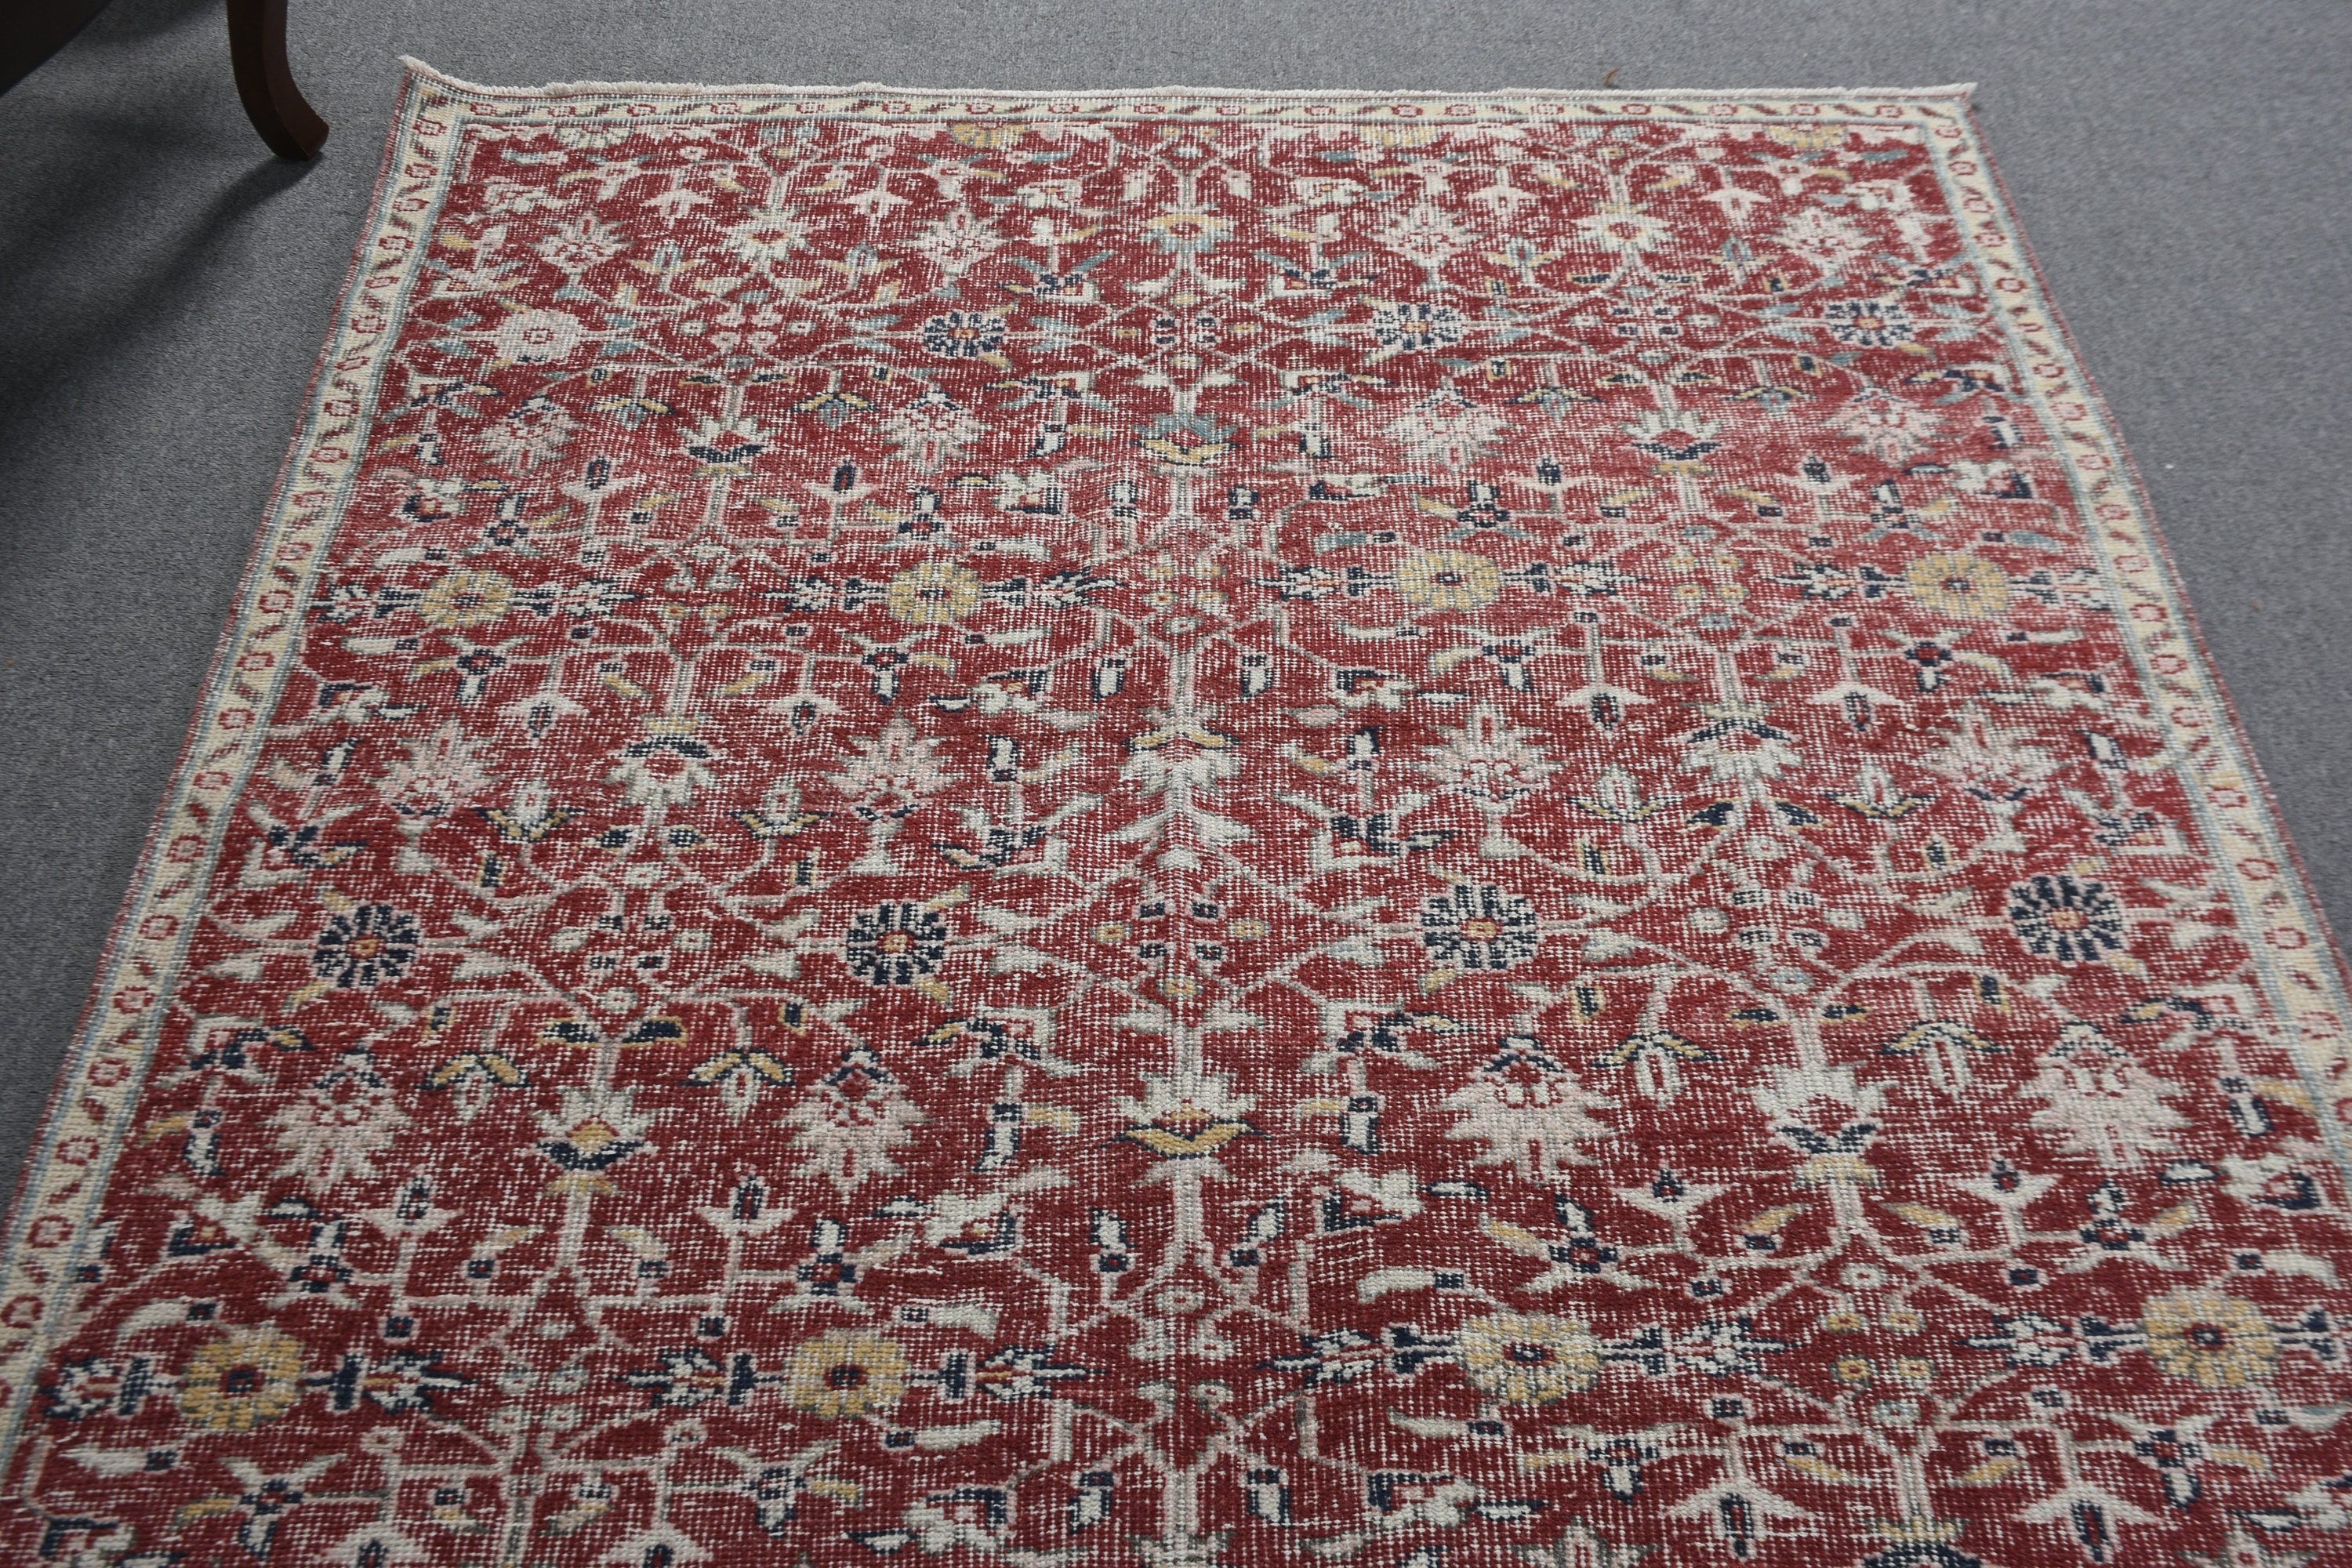 Living Room Rugs, Kitchen Rugs, 4.4x8.9 ft Area Rug, Home Decor Rug, Rugs for Kitchen, Vintage Rug, Turkish Rug, Red Cool Rug, Outdoor Rugs